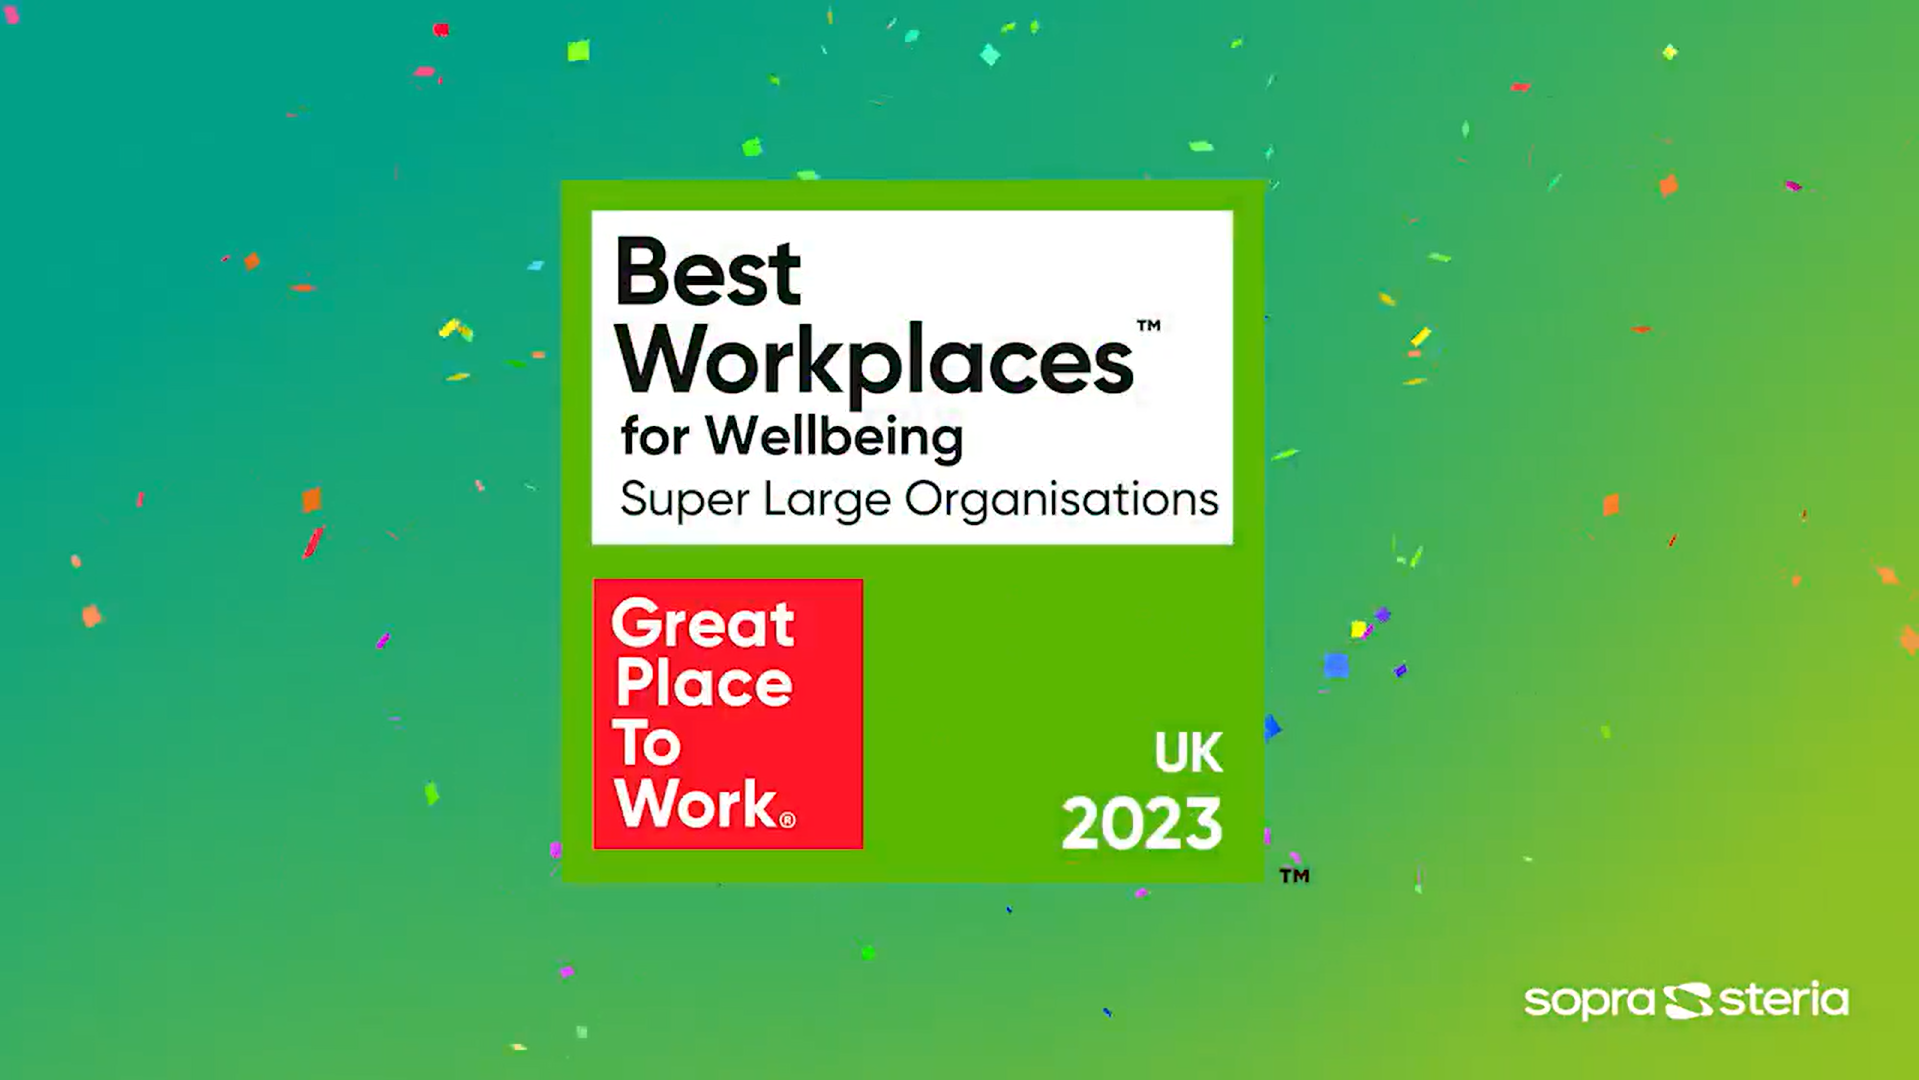 Great Place to Work UK's Best Workplaces for Wellbeing 2023 logo